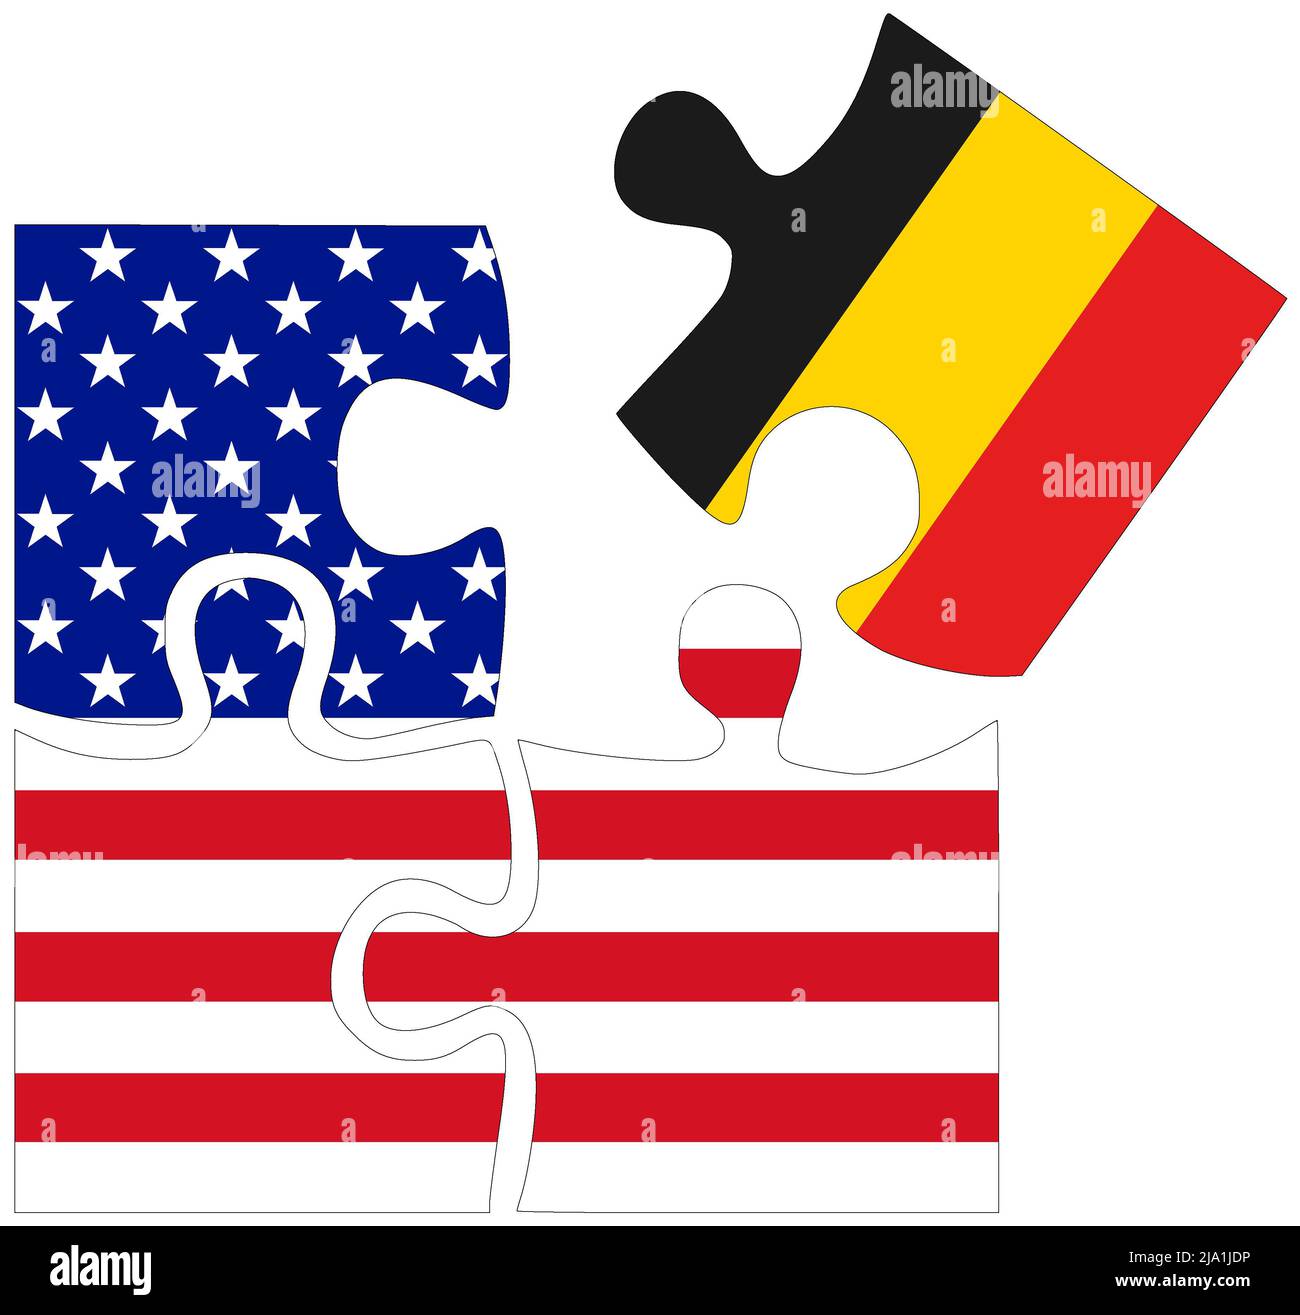 USA - Belgium : puzzle shapes with flags, symbol of agreement or friendship Stock Photo